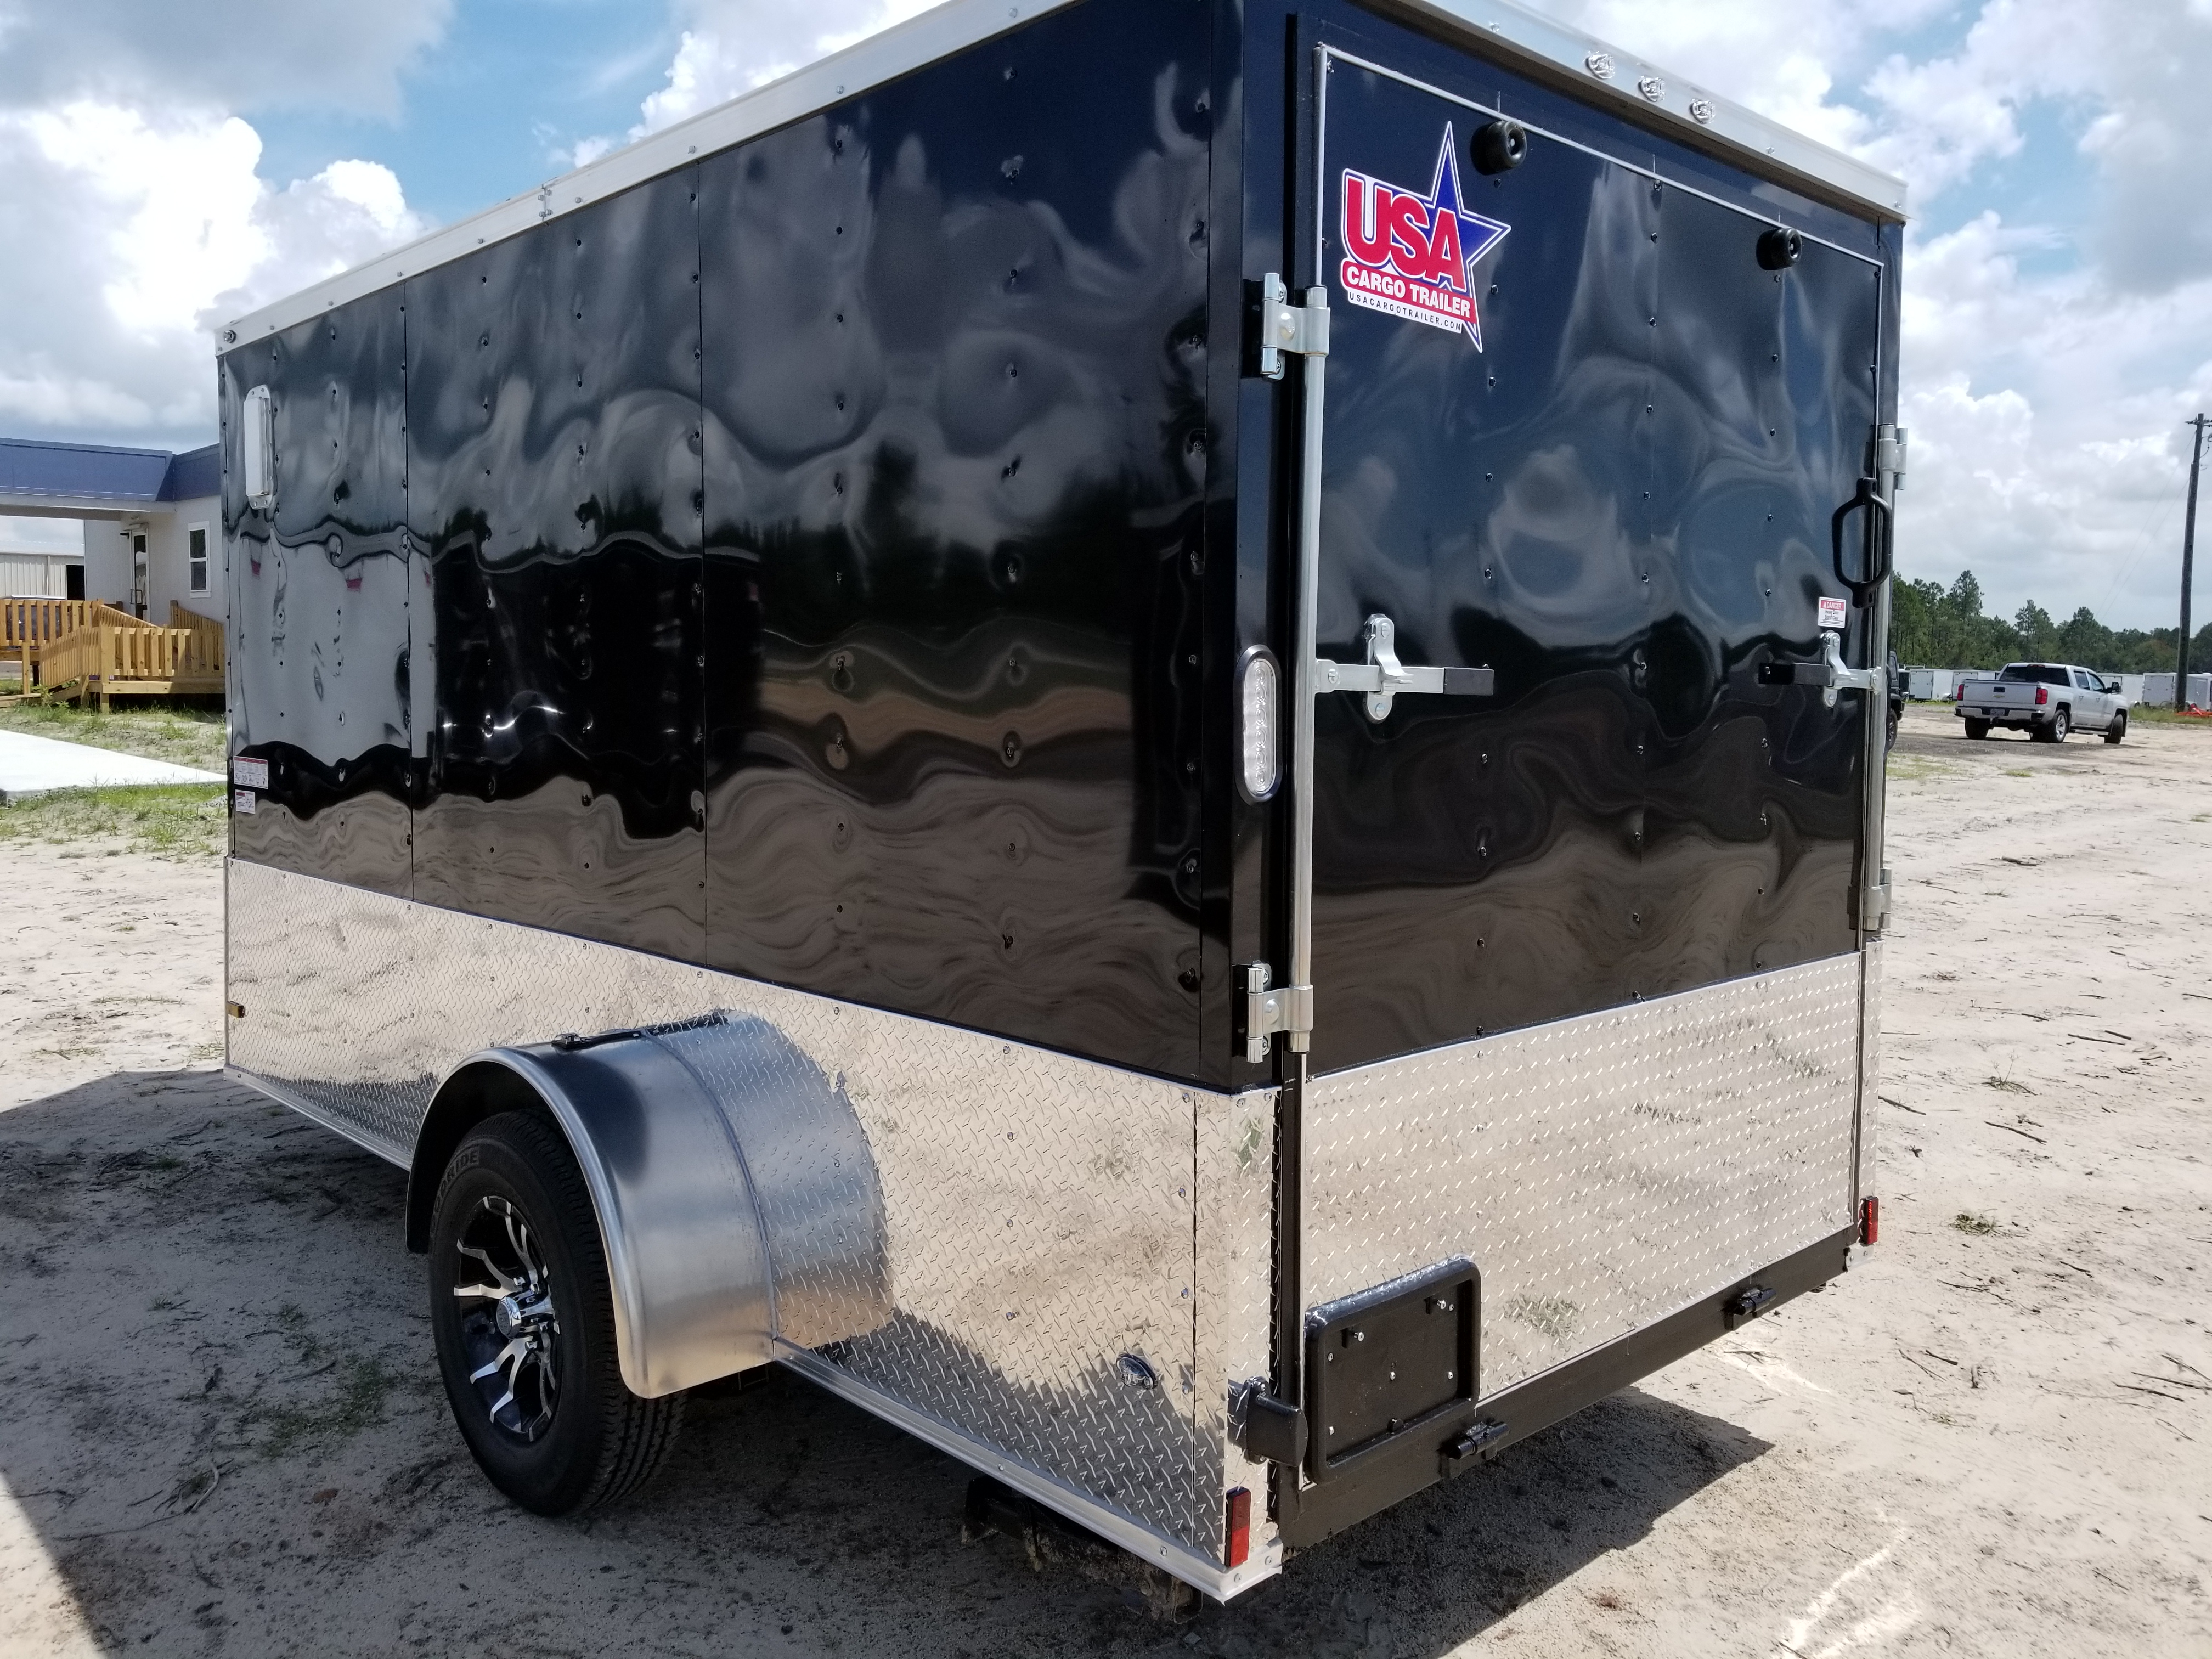 6 × 12 Enclosed Cargo Trailers For Sale Cheap. 